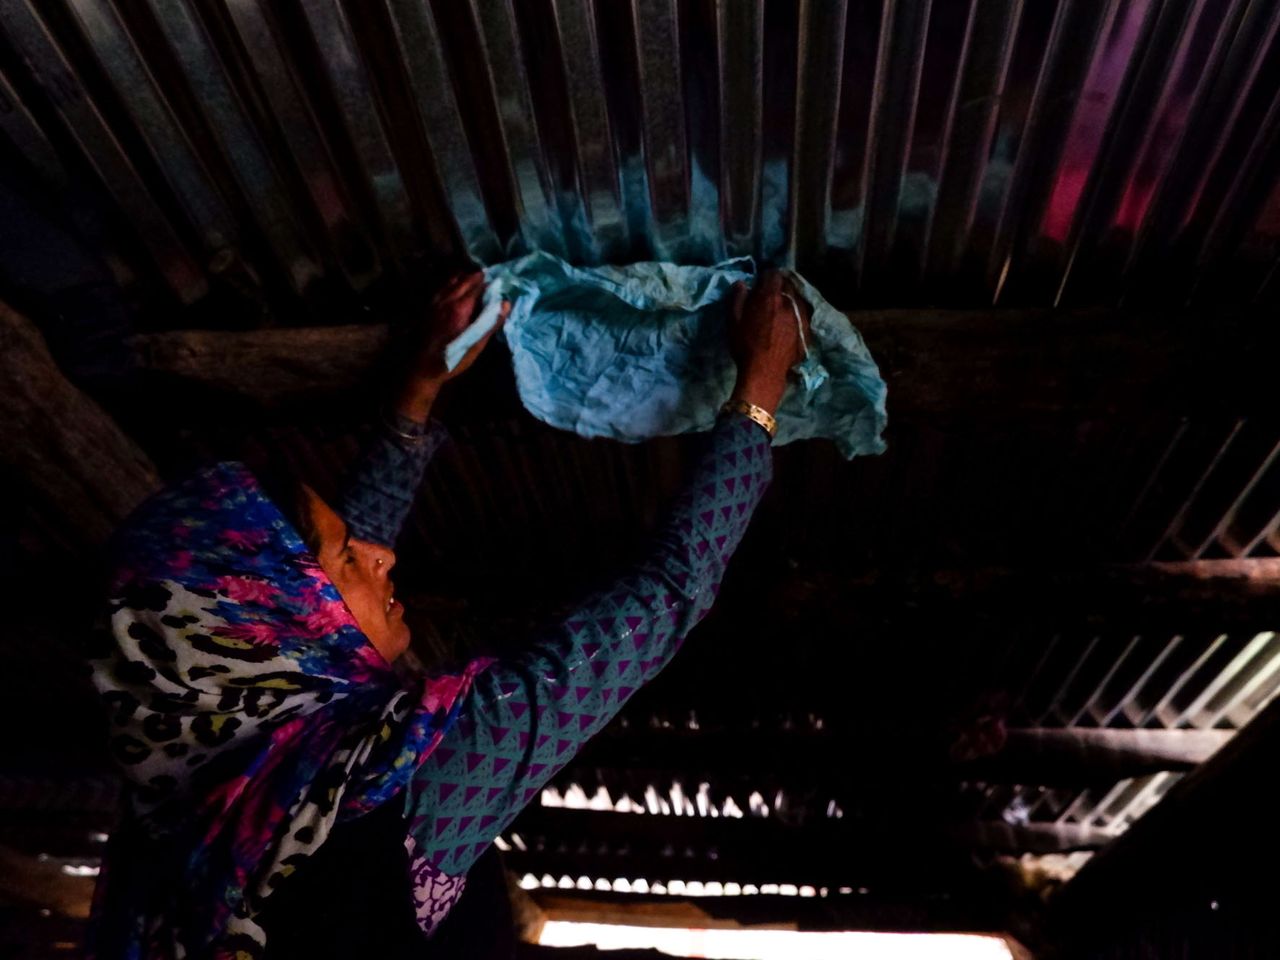 Naseema drying the washed menstrual cloth on her rooftop, away from her husband’s gaze. The tribal women hide their menstruation from male family members including their husbands and do not talk about it openly. Date: 24 April, 2022.